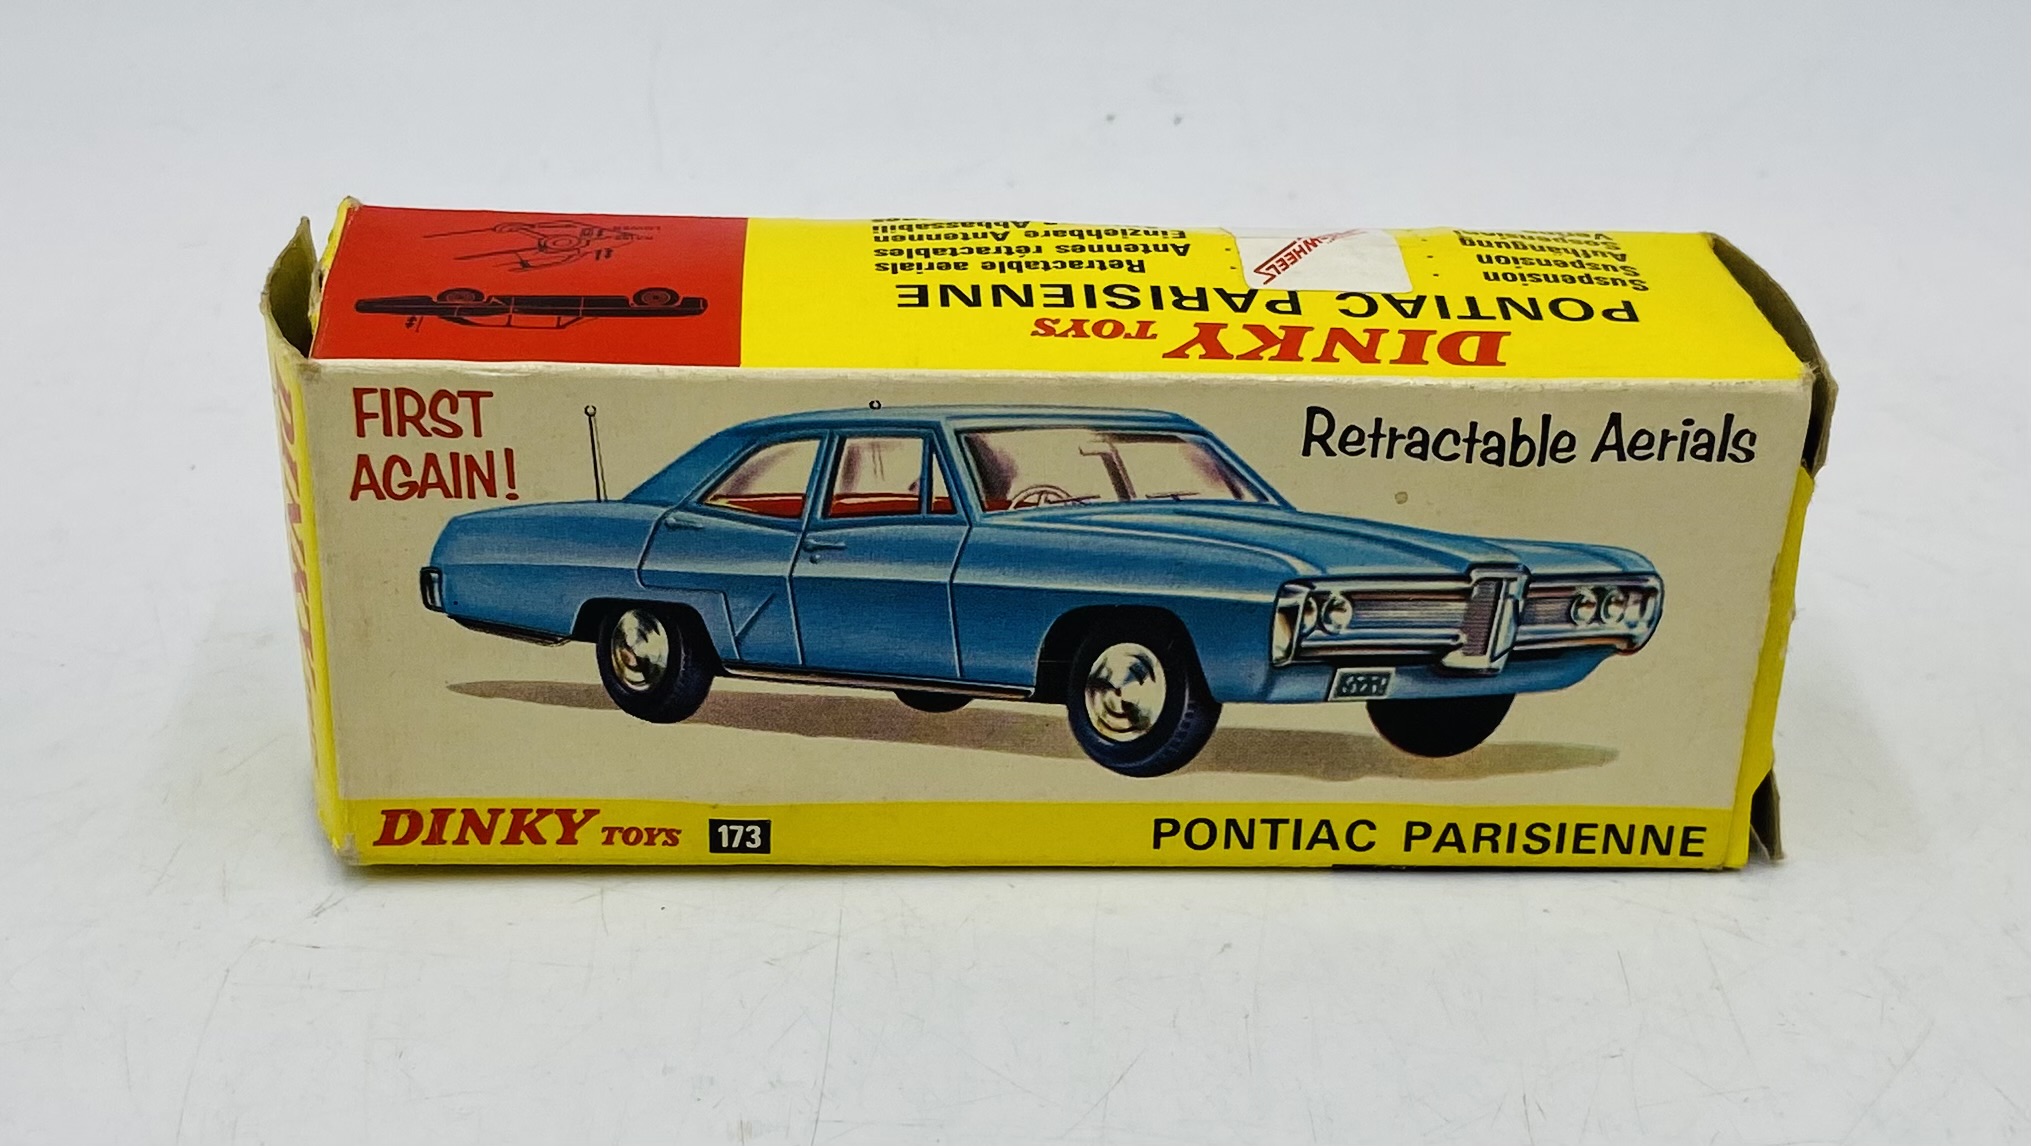 A vintage boxed Dinky Toys Pontiac Parisienne die-cast car in metallic red with a yellow interior ( - Image 5 of 7